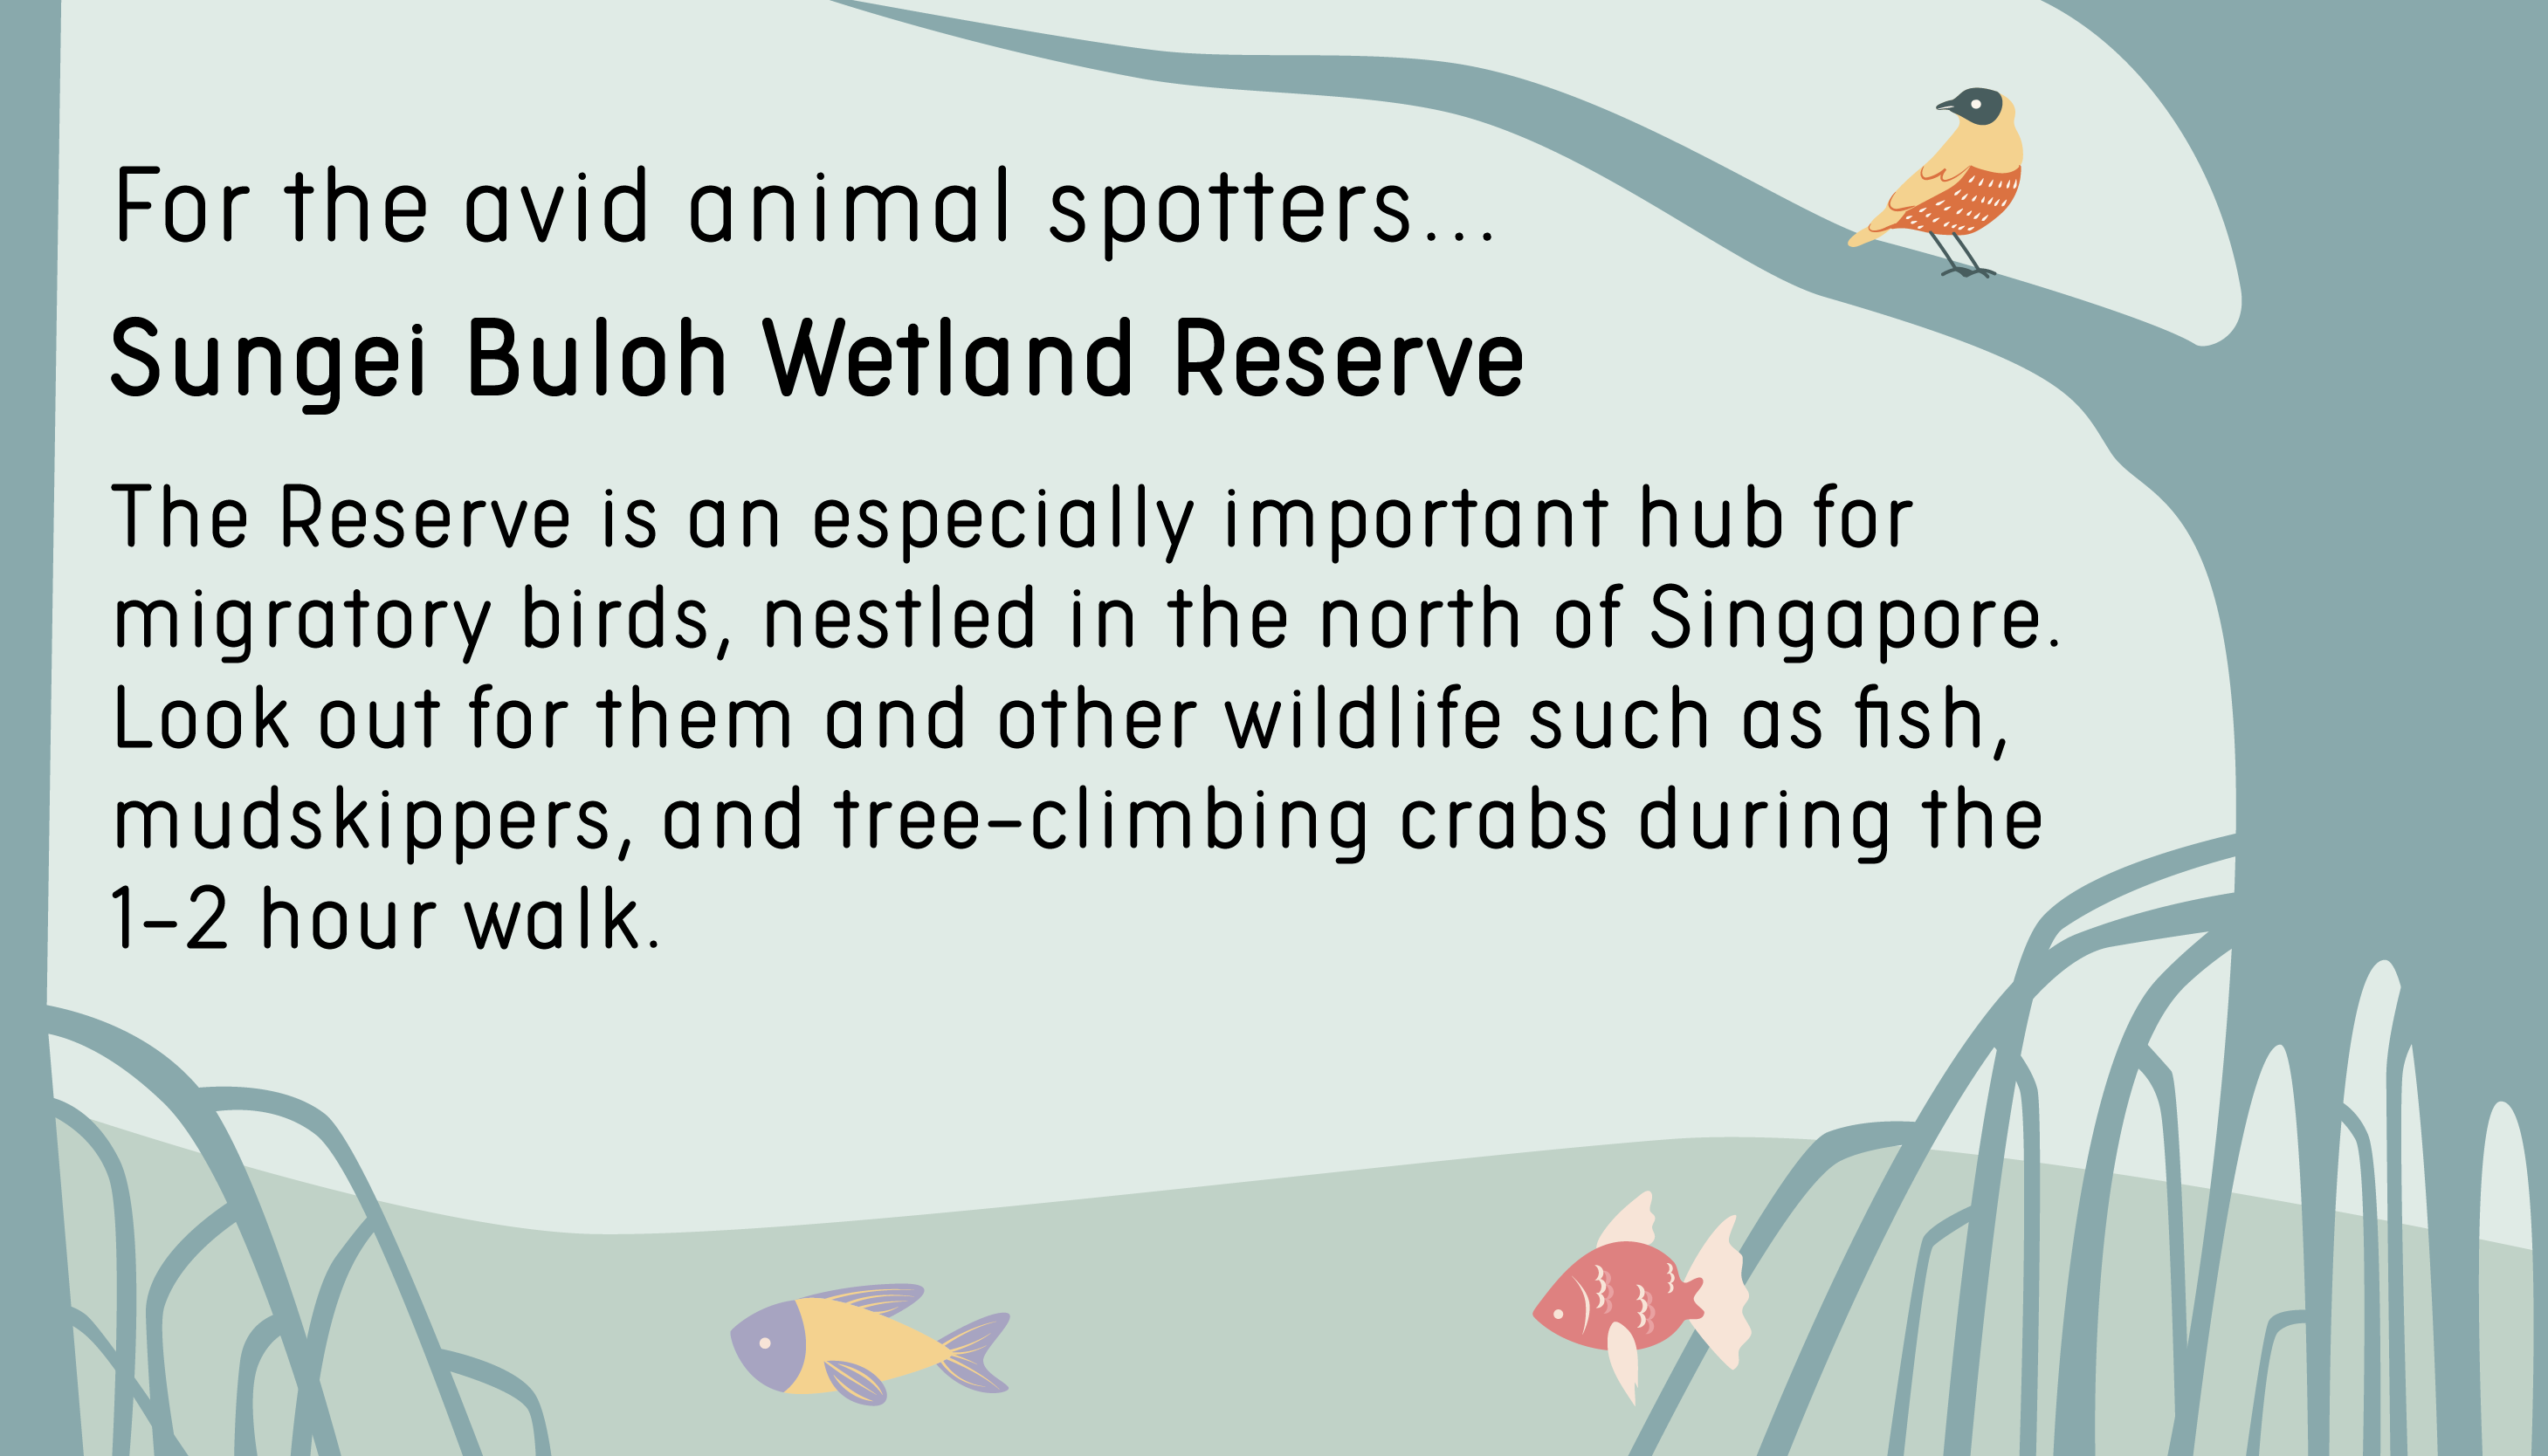 For the avid animal spotters… Sungei Buloh Wetland Reserve is an especially important hub for migratory birds, nestled in the north of Singapore. Look out for them and other wildlife such as fish, mudskippers, and tree-climbing crabs during the 1–2-hour walk.